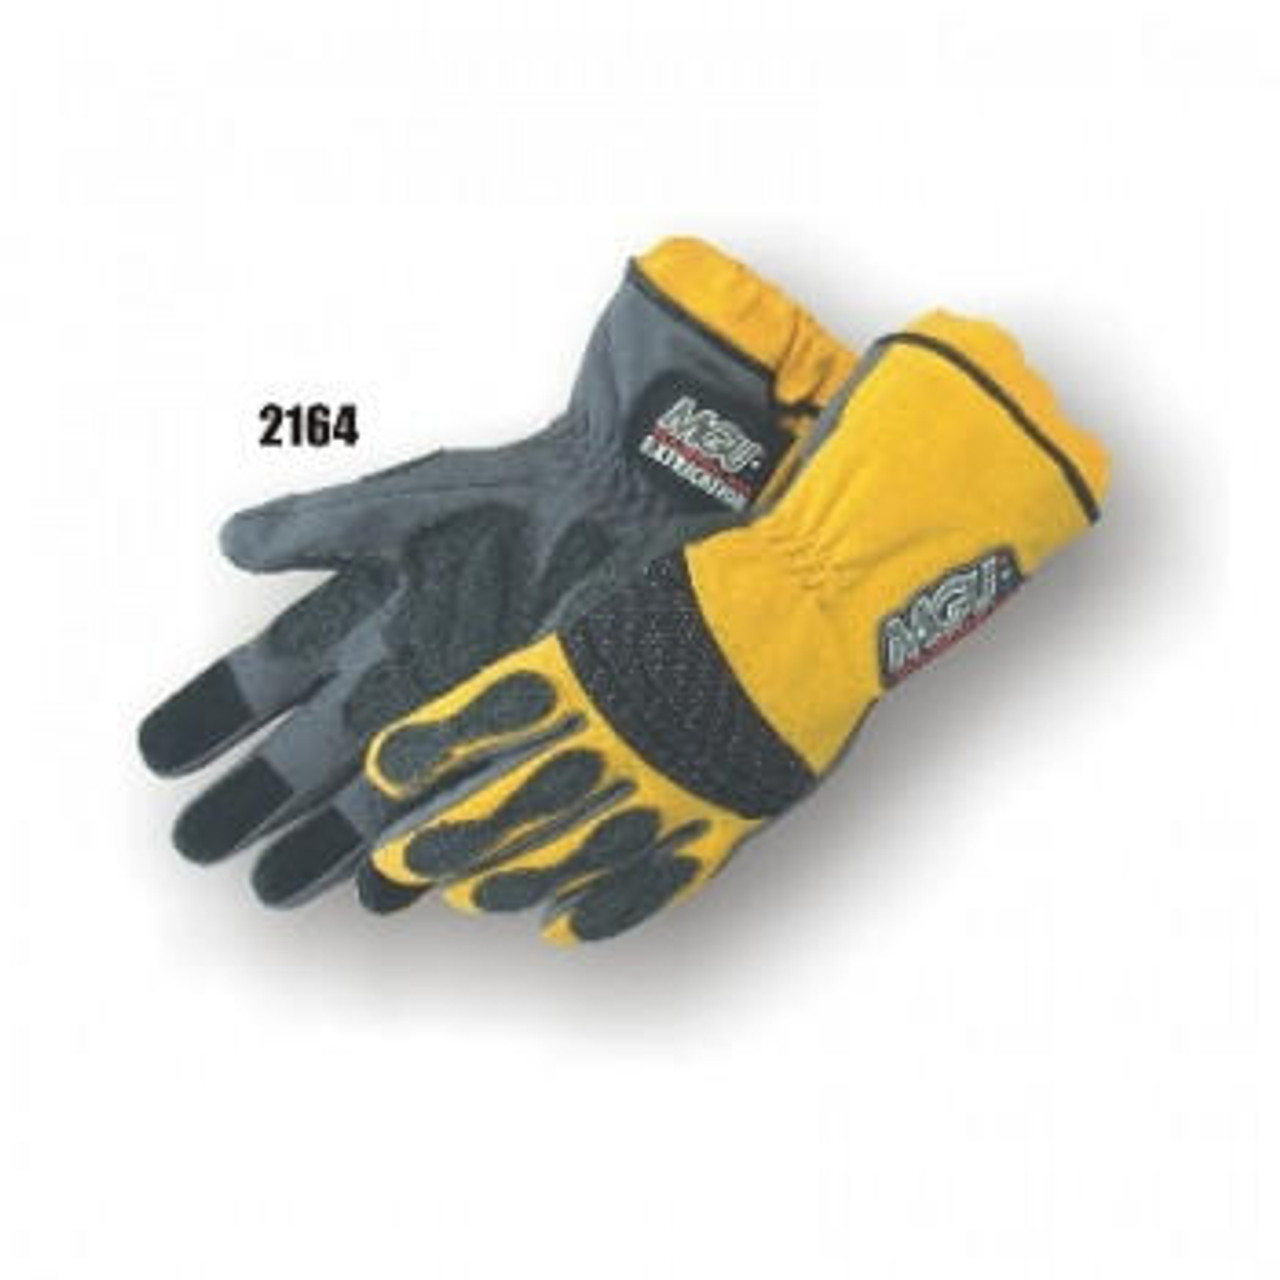 https://cdn11.bigcommerce.com/s-1gtbylhith/images/stencil/1280x1280/products/30355/66947/majestic-glove-2164-long-extrication-glove__61042.1700509642.jpg?c=1